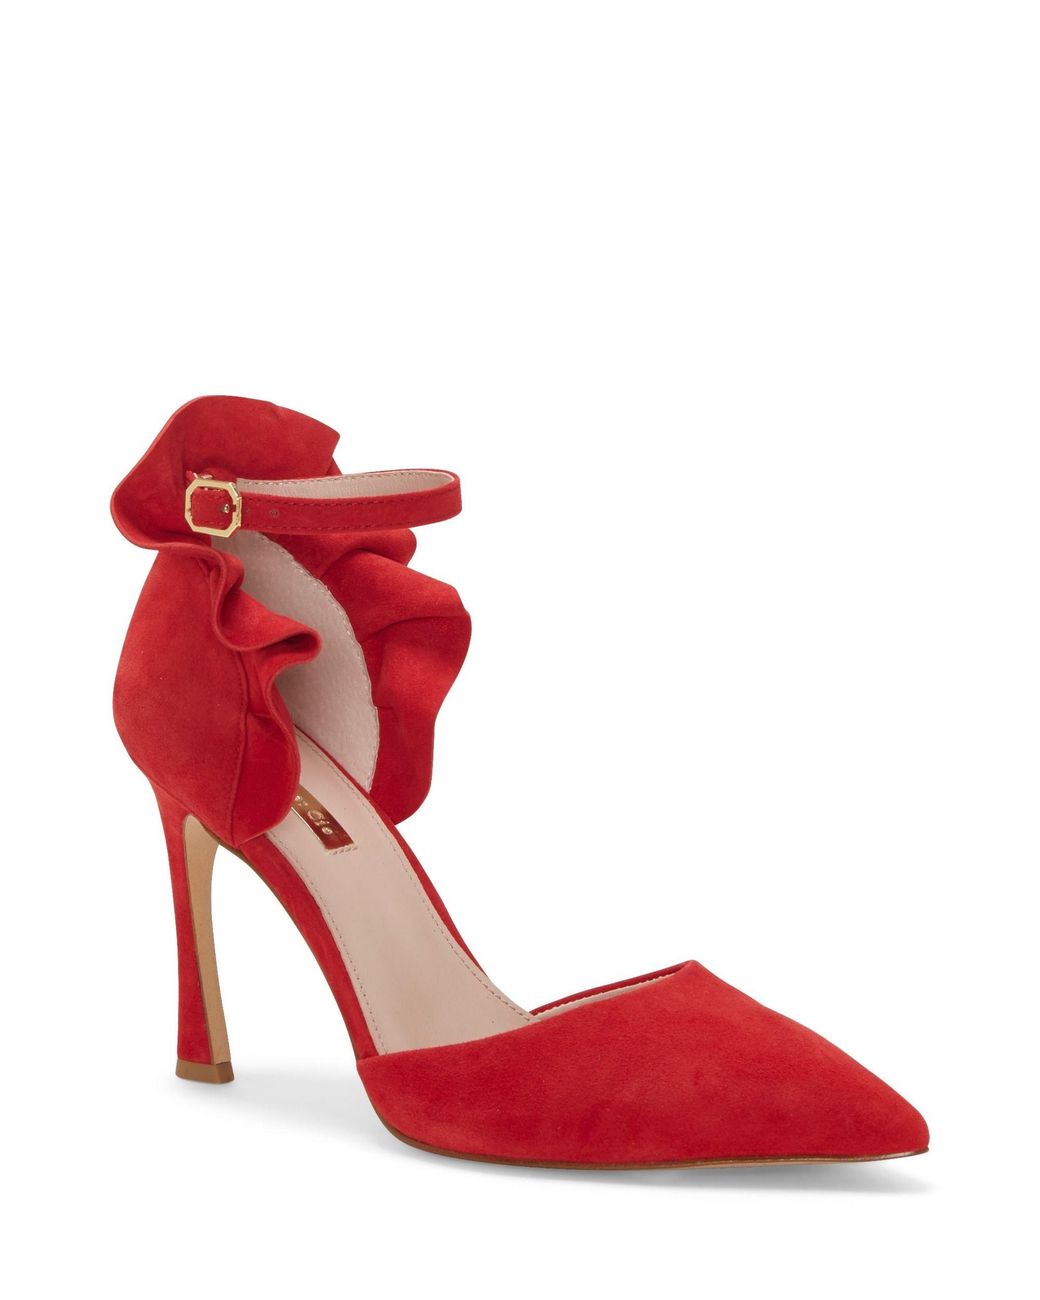 Vince Camuto Suede Telissa Ruffle-detail Pump in Red - Lyst